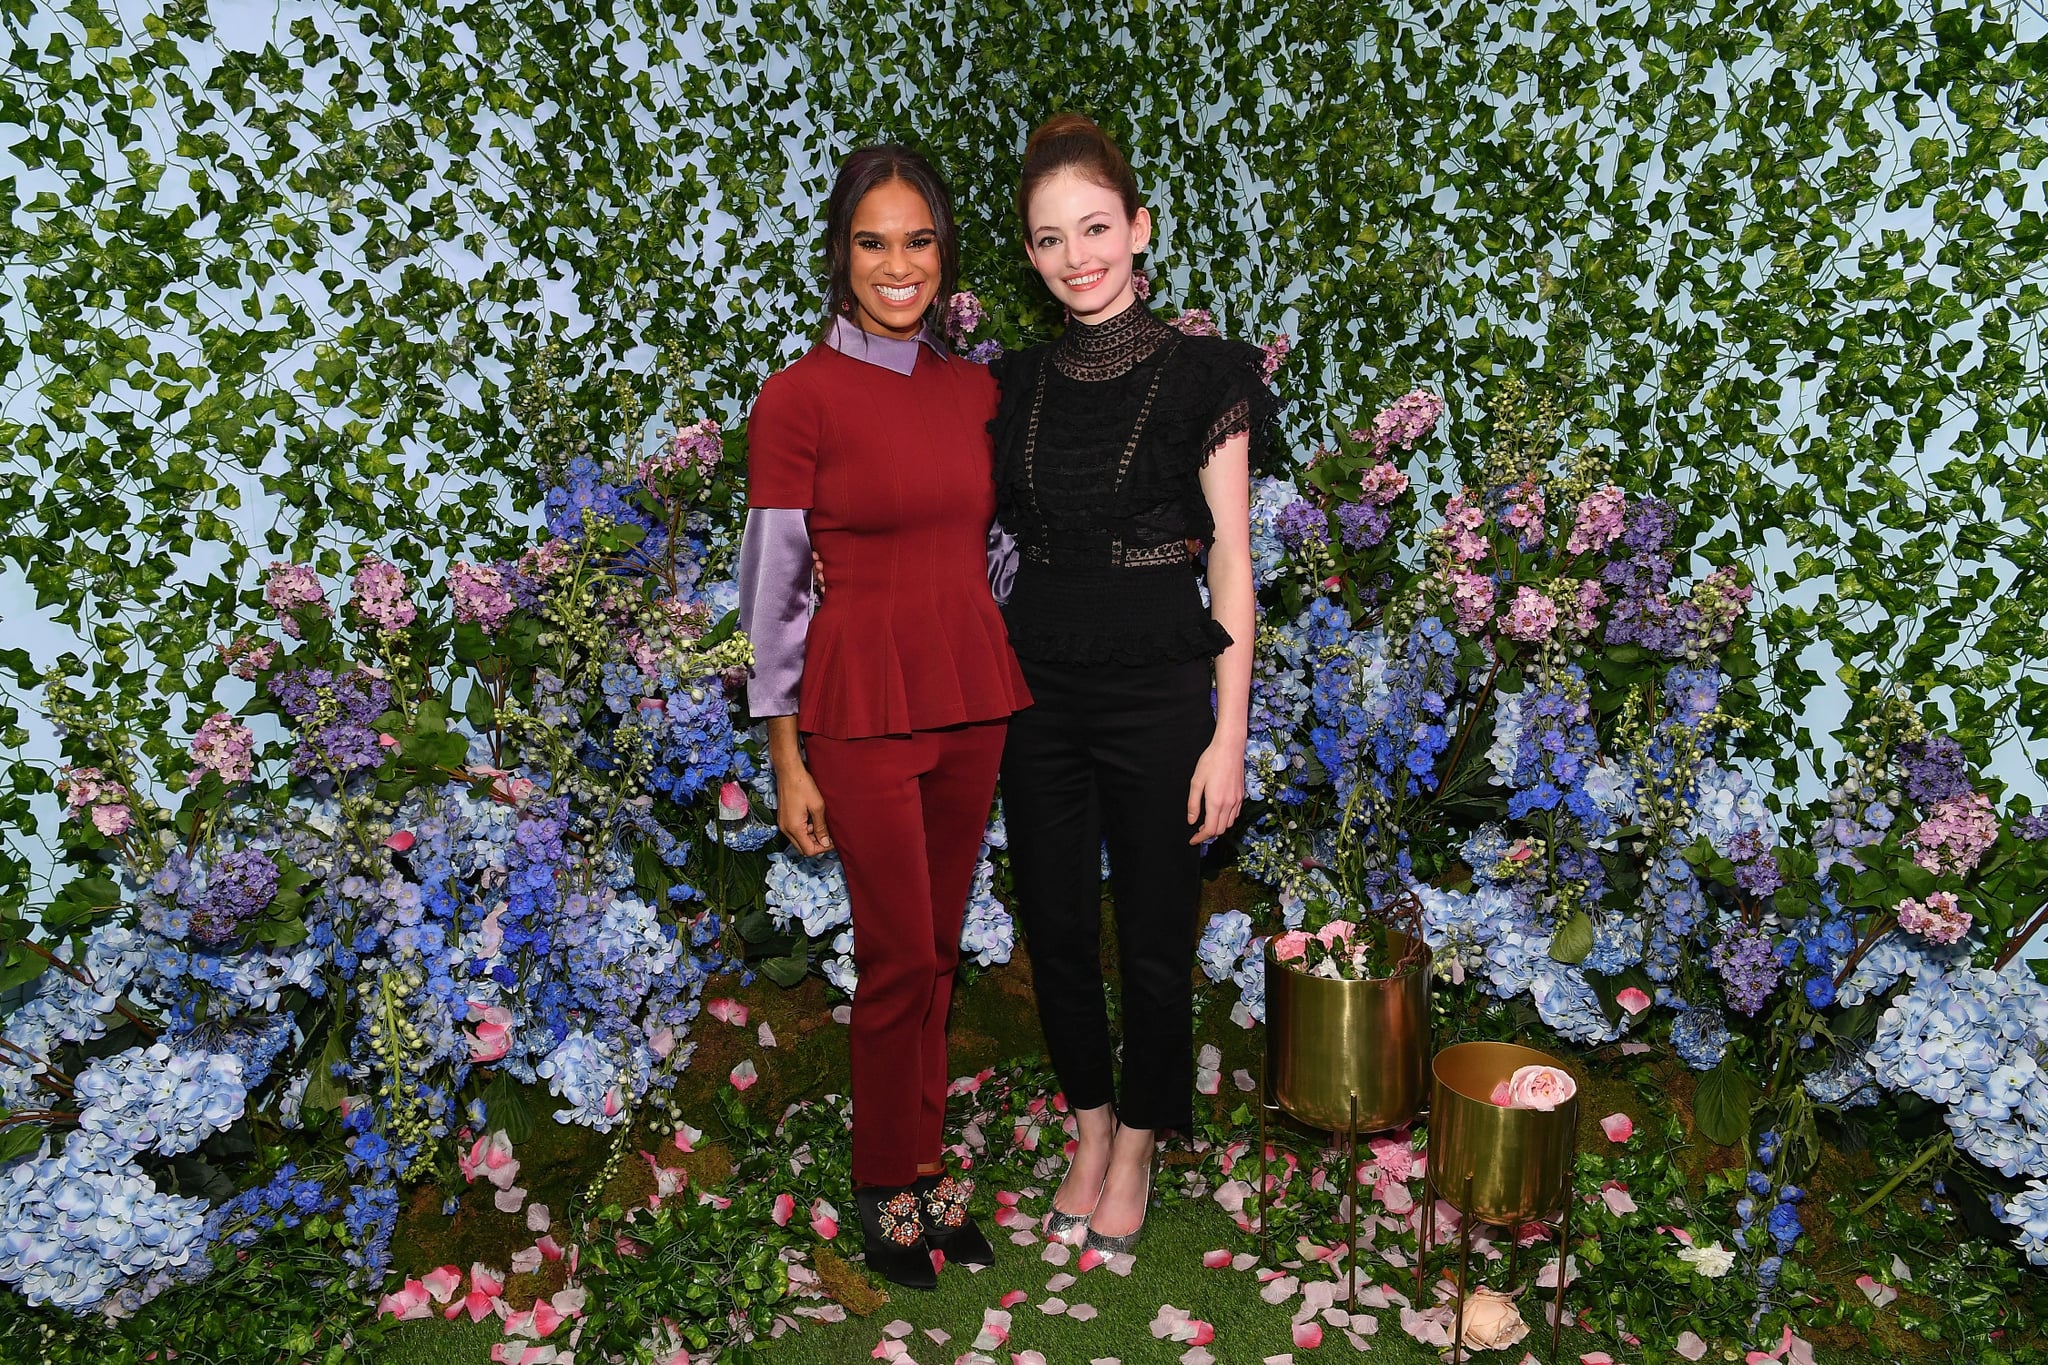 NEW YORK, NY - OCTOBER 22:  Misty Copeland (L) and Mackenzie Foy attend the Disney and POPSUGAR celebration of 'The Nutcracker and the Four Realms' with the film's stars Mackenzie Foy and Misty Copeland at an immersive activation, Journey Into The Four Realms, at The Oculus at Westfield World Trade Center on October 22, 2018 in New York City, United States.  (Photo by Dia Dipasupil/Getty Images for Disney Studios)